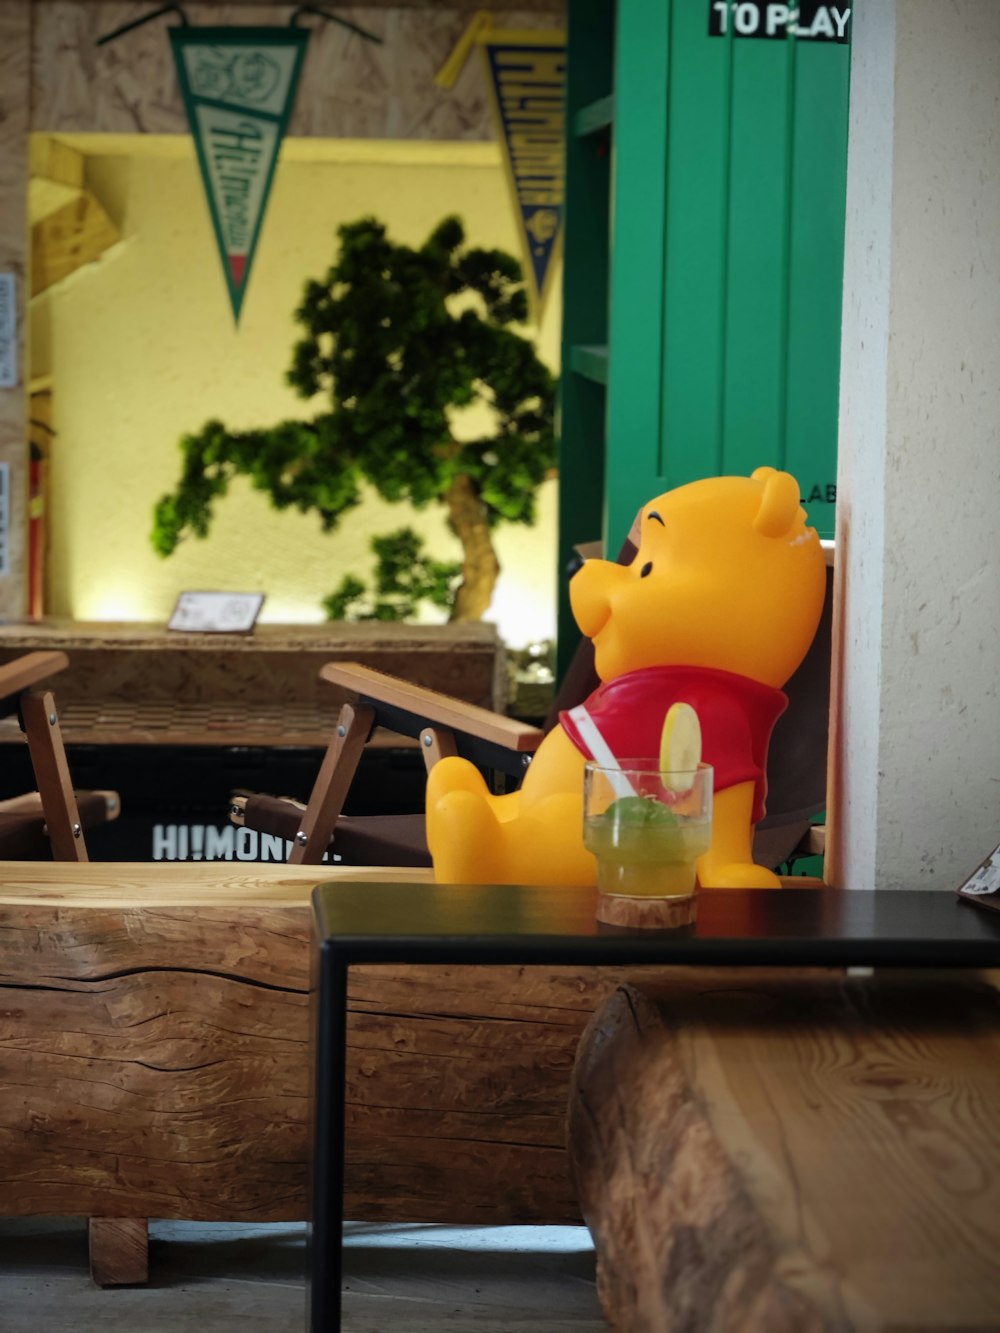 a winnie the pooh toy sitting on a table